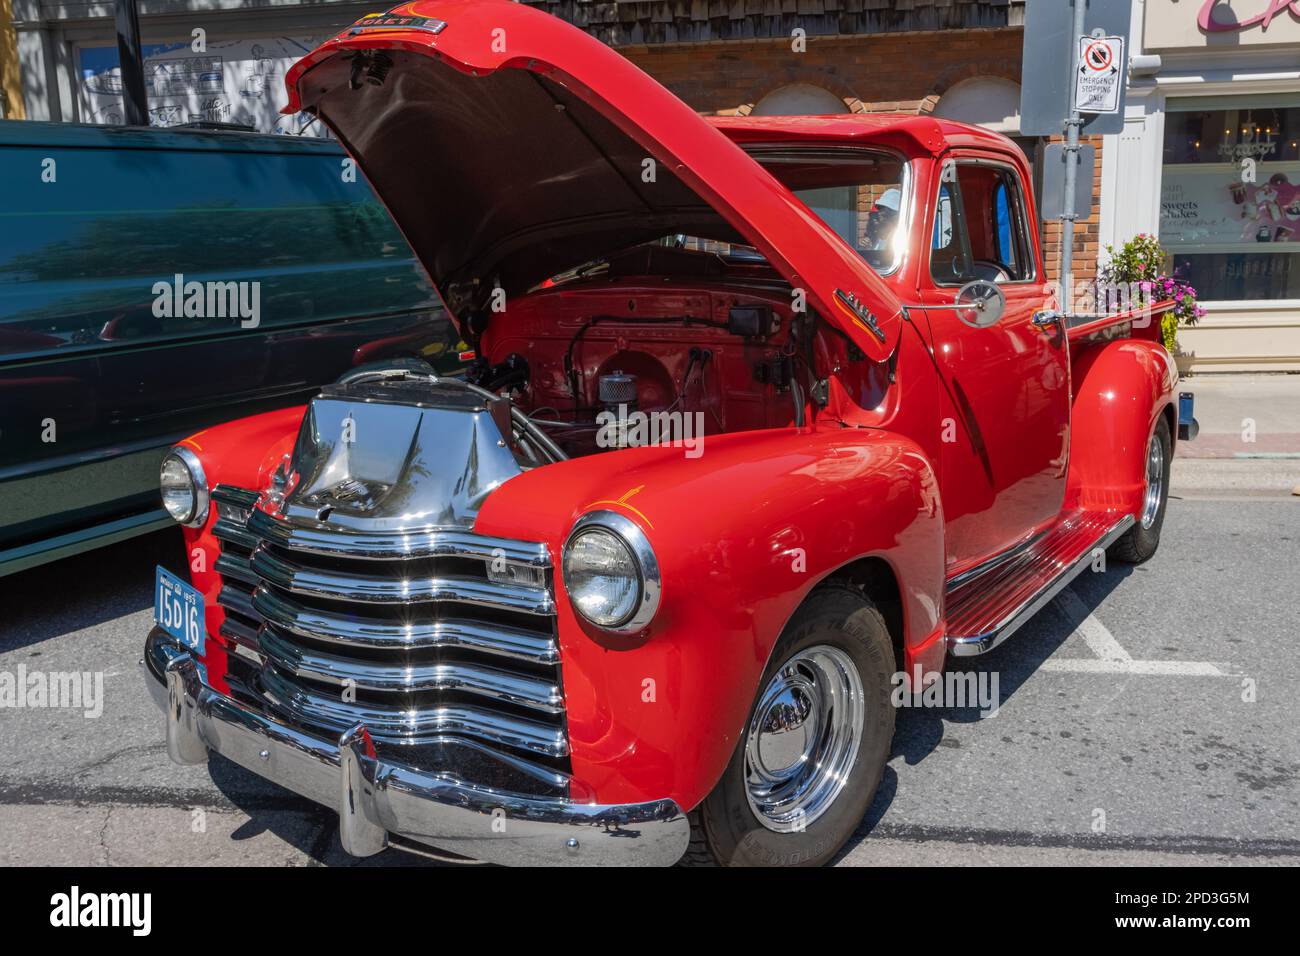 Burlington, ON, Canada - July 09, 2022: High perspective view of a 1951 Chevrolet 3100 Pickup Truck at a local car show. Stock Photo